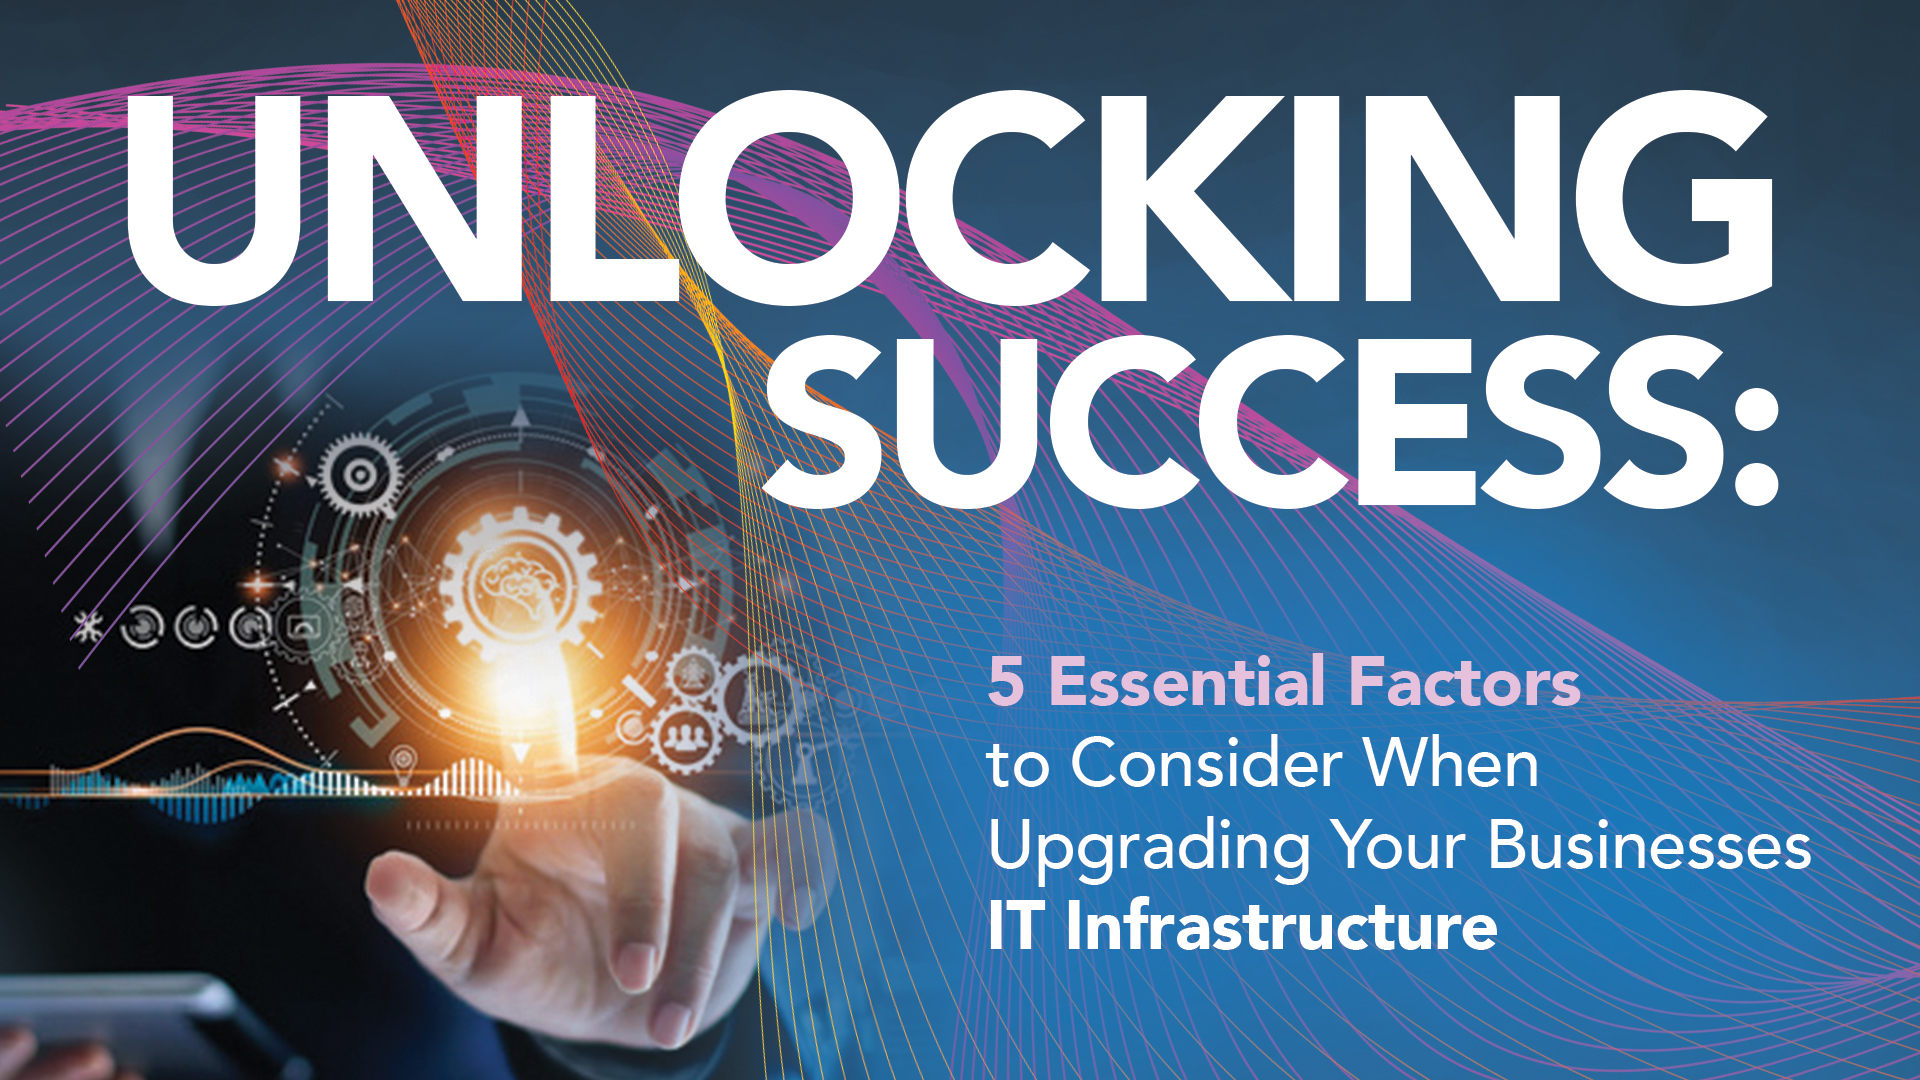 Top 5 Things Your Business Needs to Consider Before Upgrading Your IT Infrastructure   